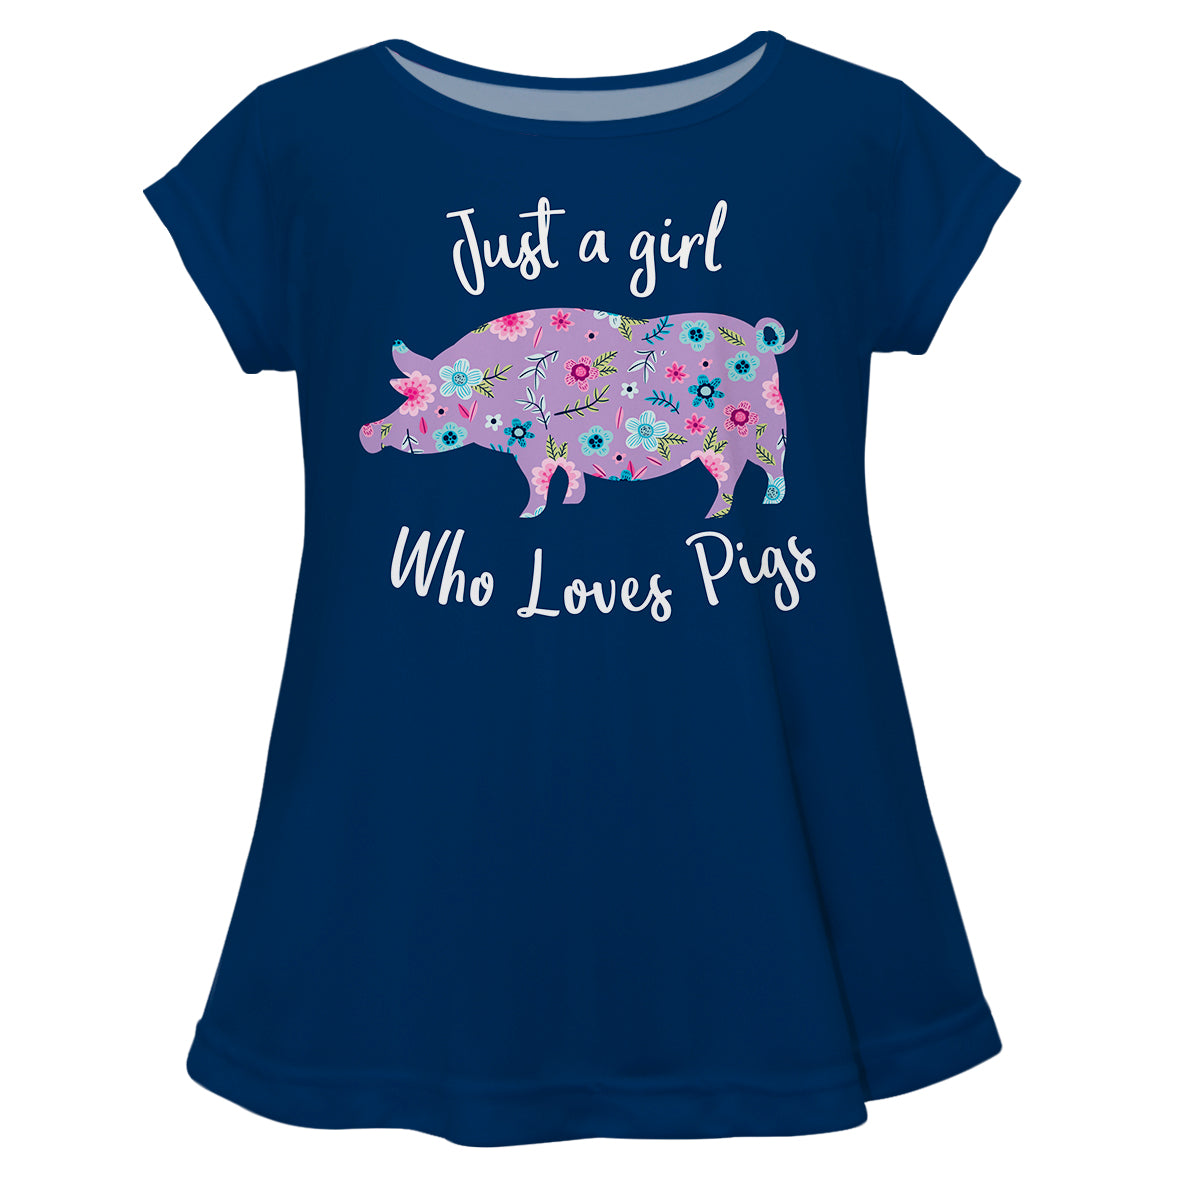 Just A Girl Who Loves Pigs Navy Short Sleeve Laurie Top - Wimziy&Co.